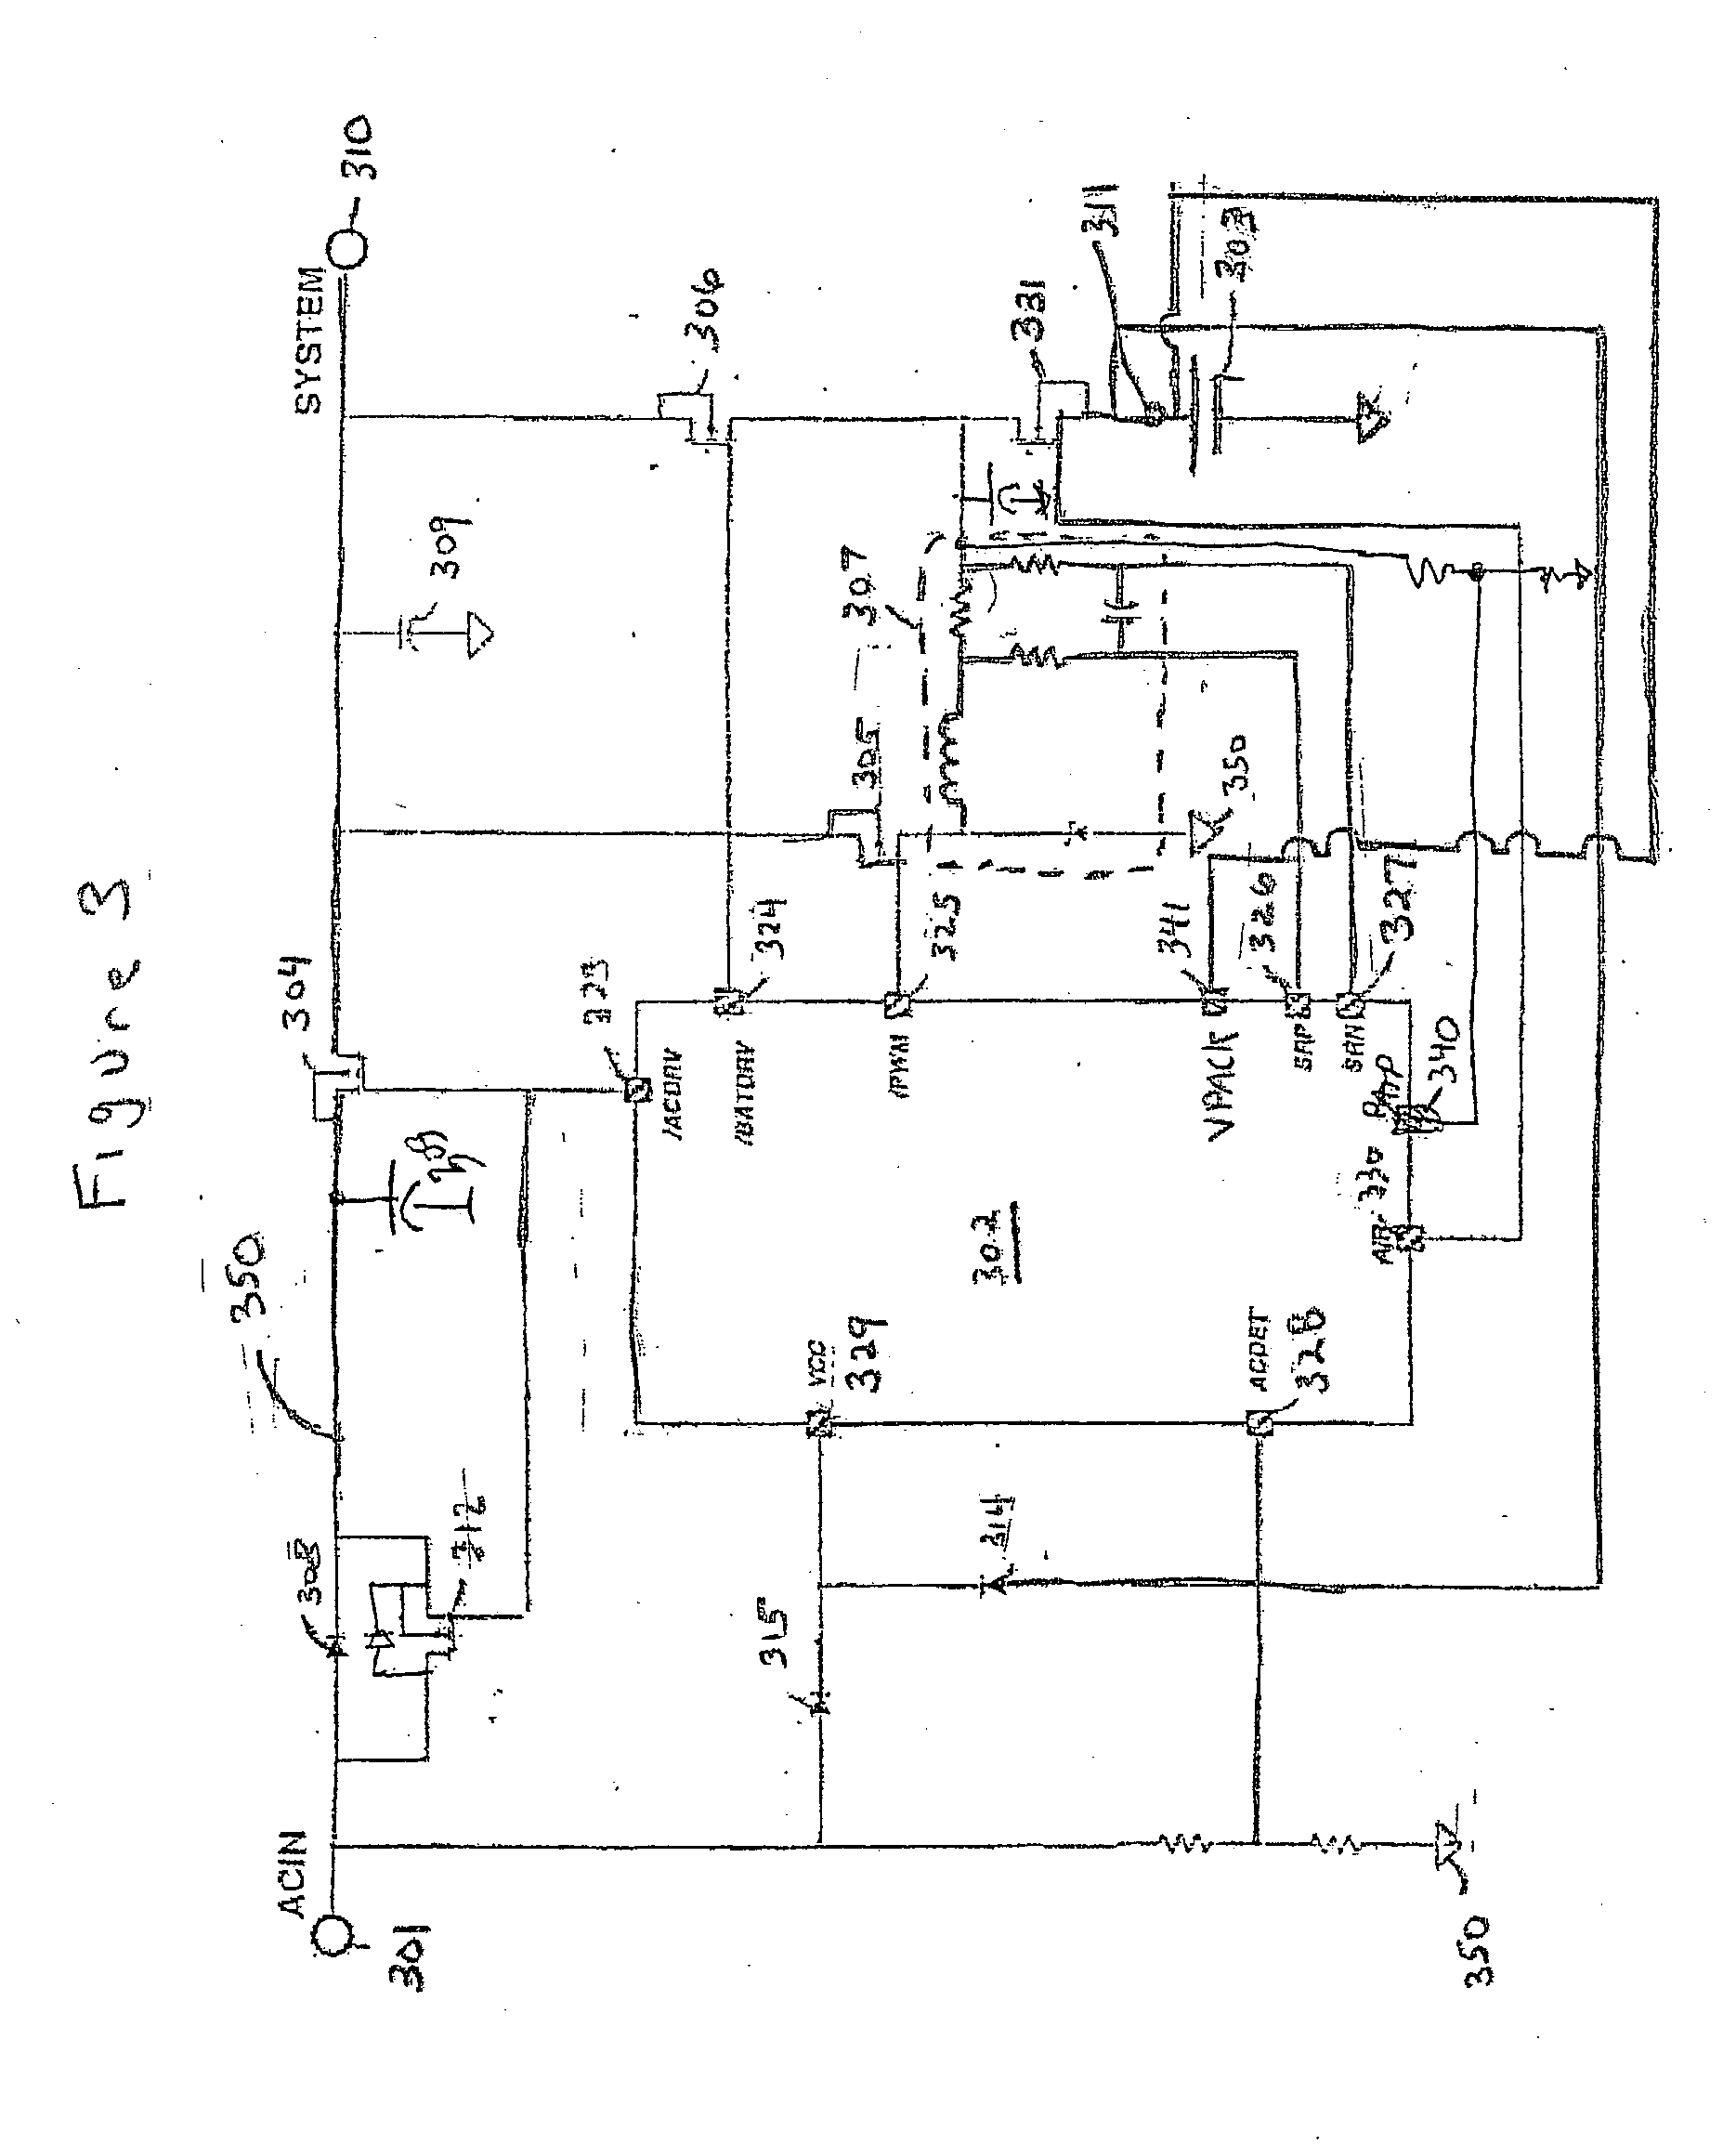 Architecture for switching power source to load in battery powered system